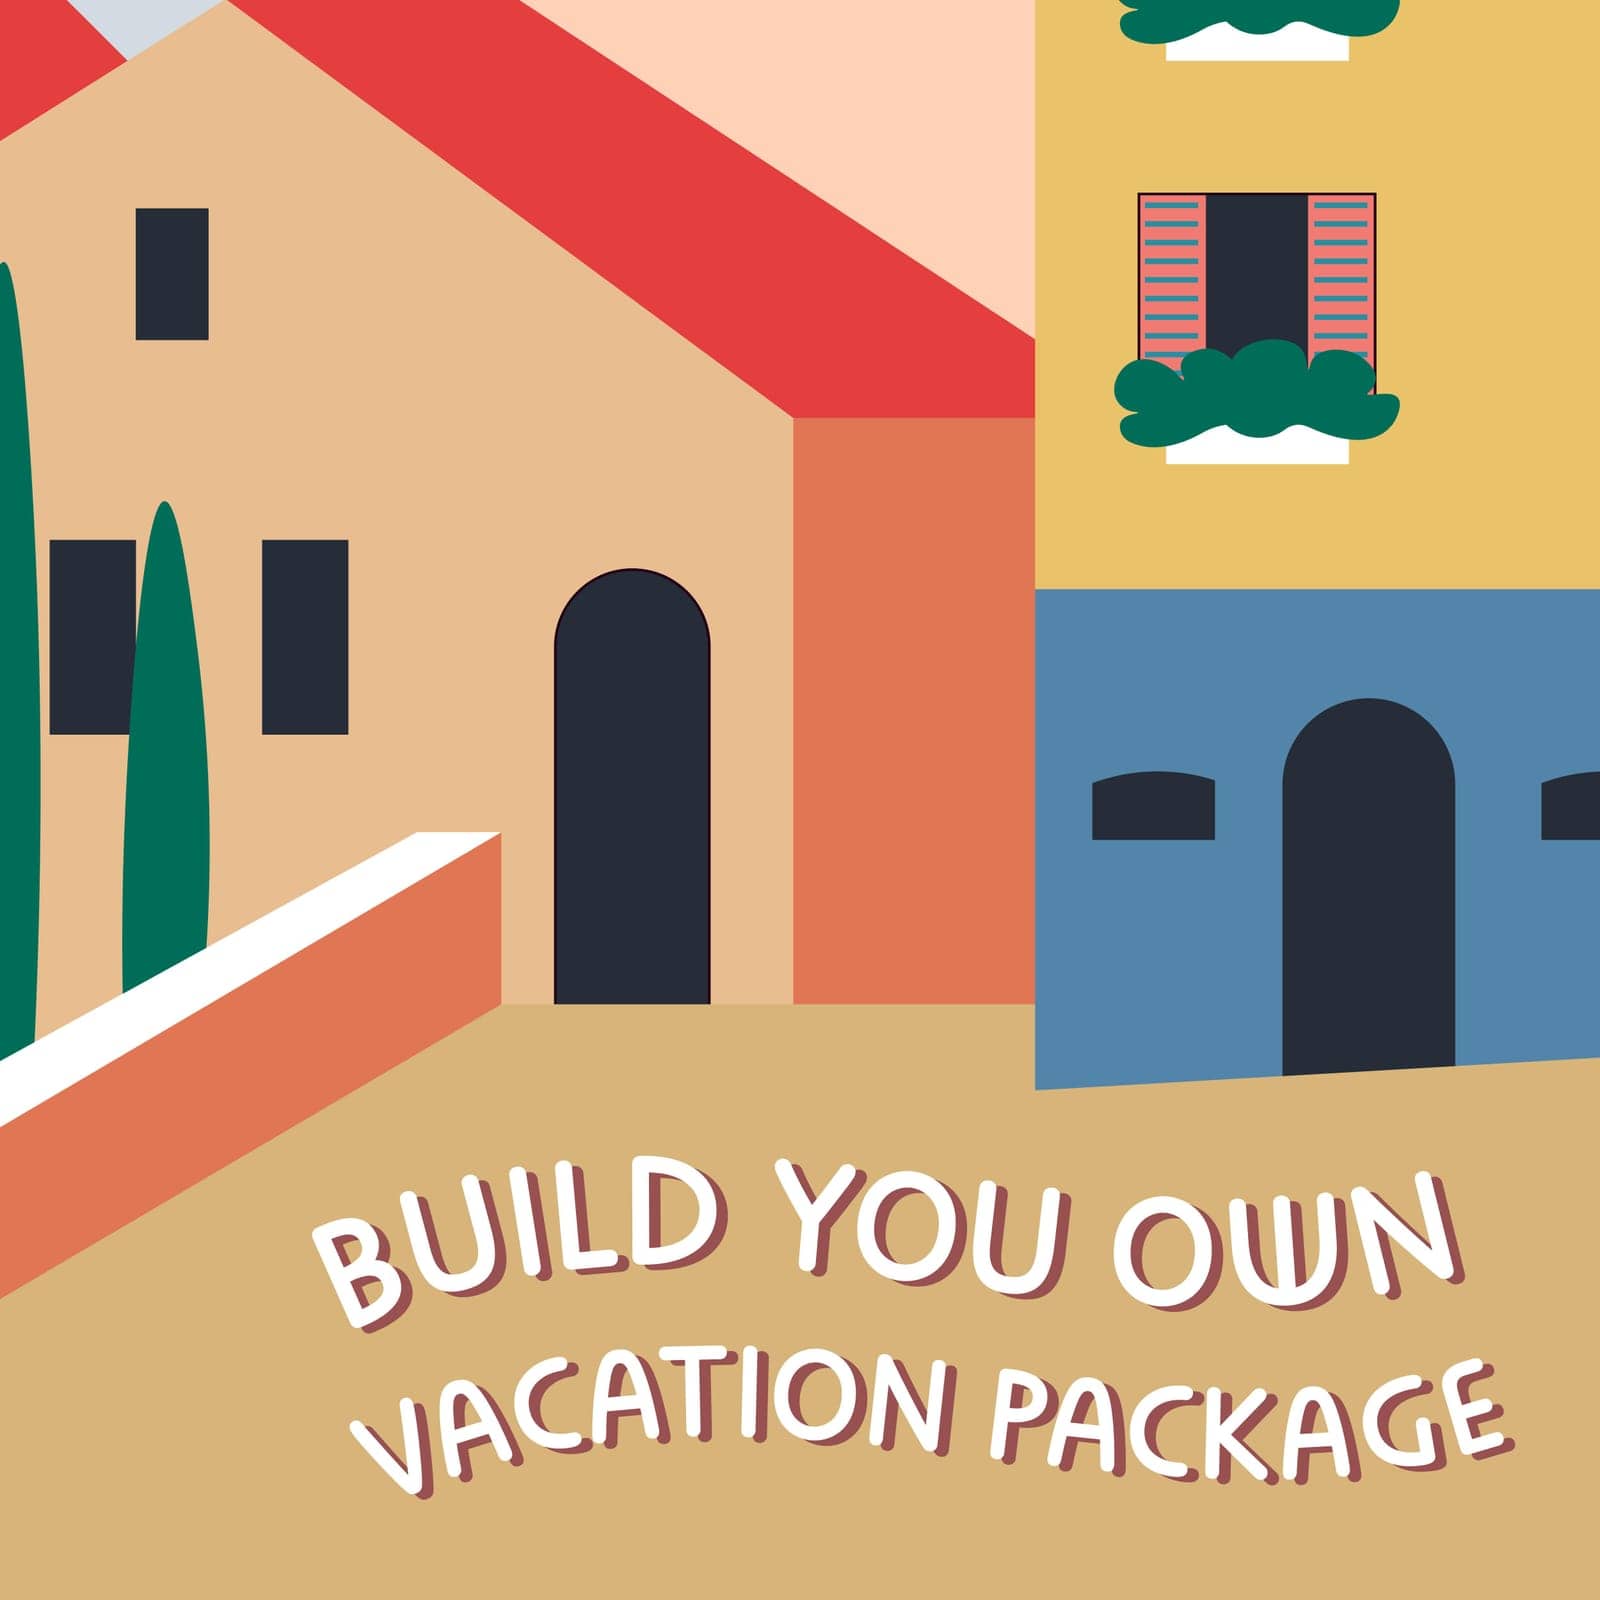 Traveling and vacation, build your own trip with routes and sites you want to see. Package from agency, holidays and weekends spending. Active rest and sightseeing on streets. Vector in flat style